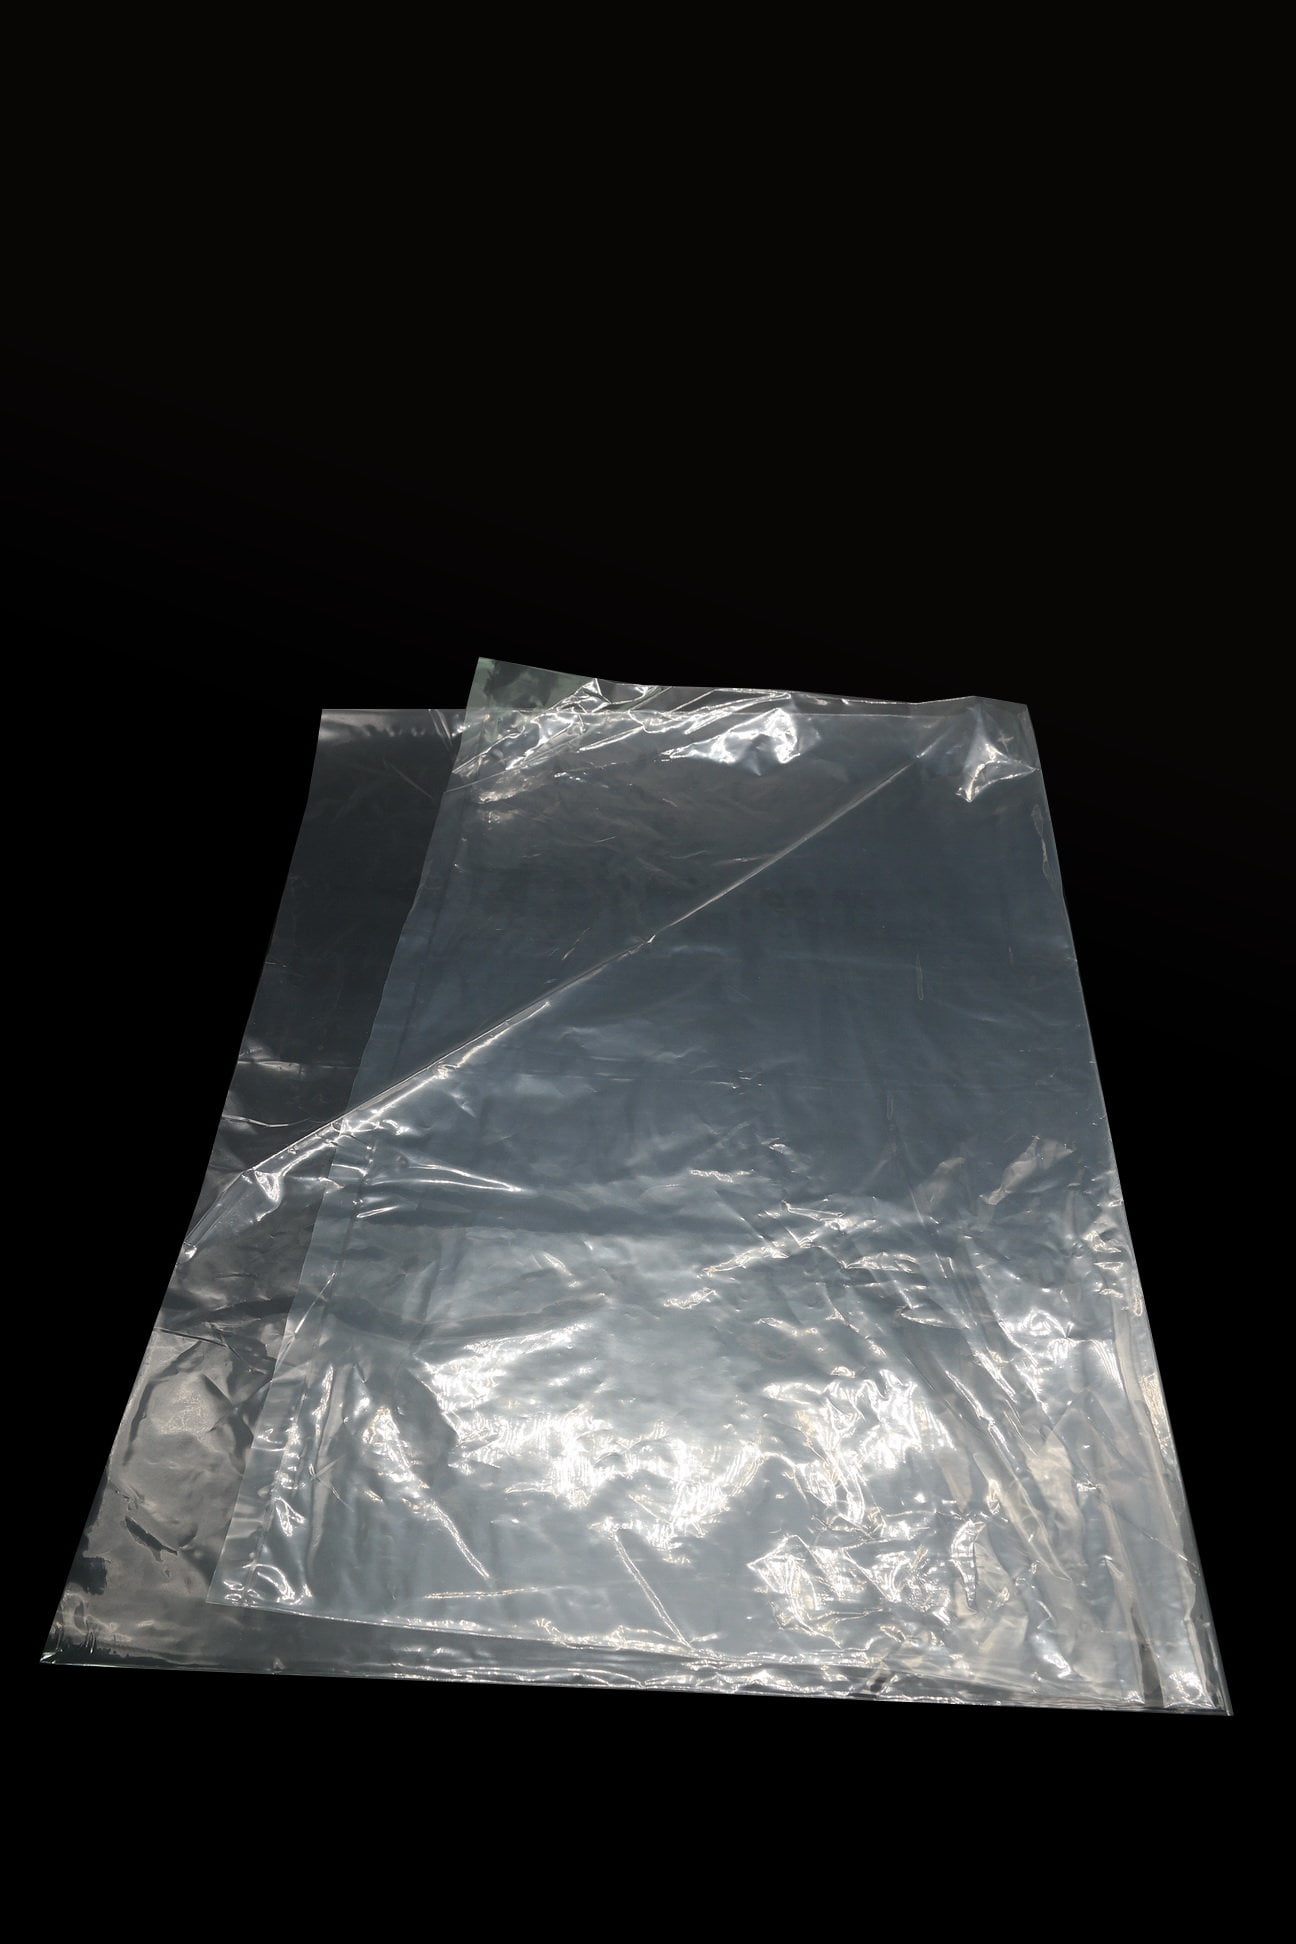 12 x 24 Inch 1000 Pack Clear Flat Poly Bag 2 Mil